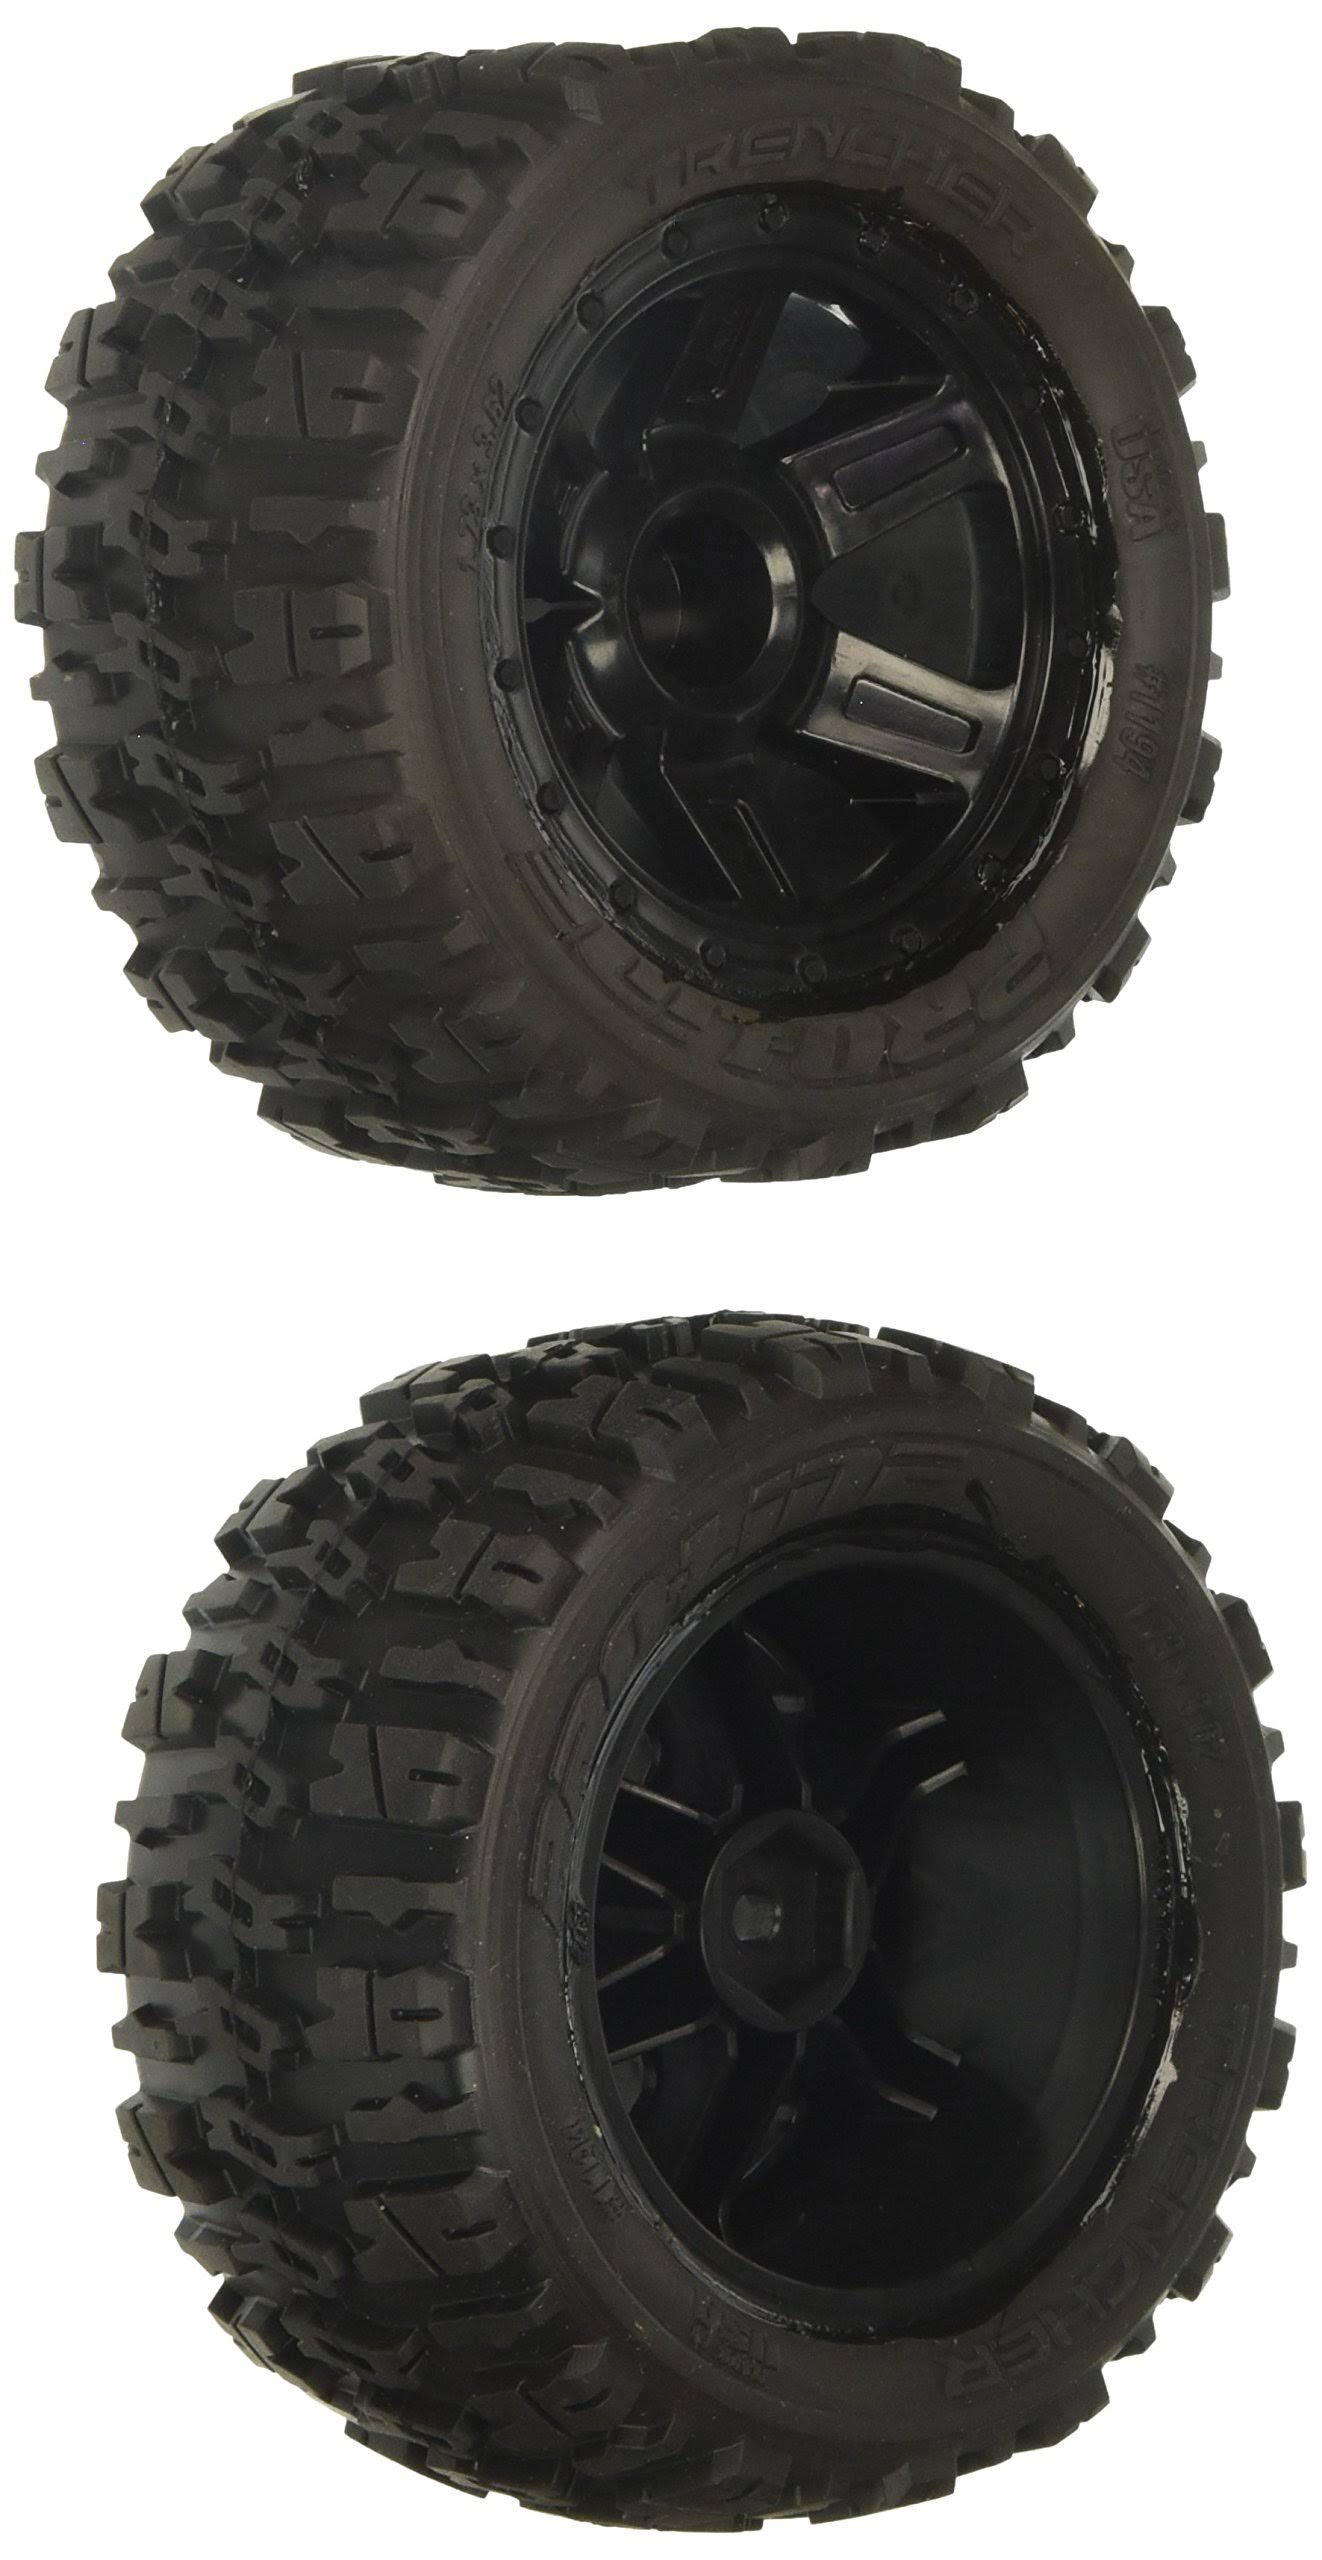 Pro-Line 1/16 Trencher 2.2" M2 All Terrain Tires Mounted